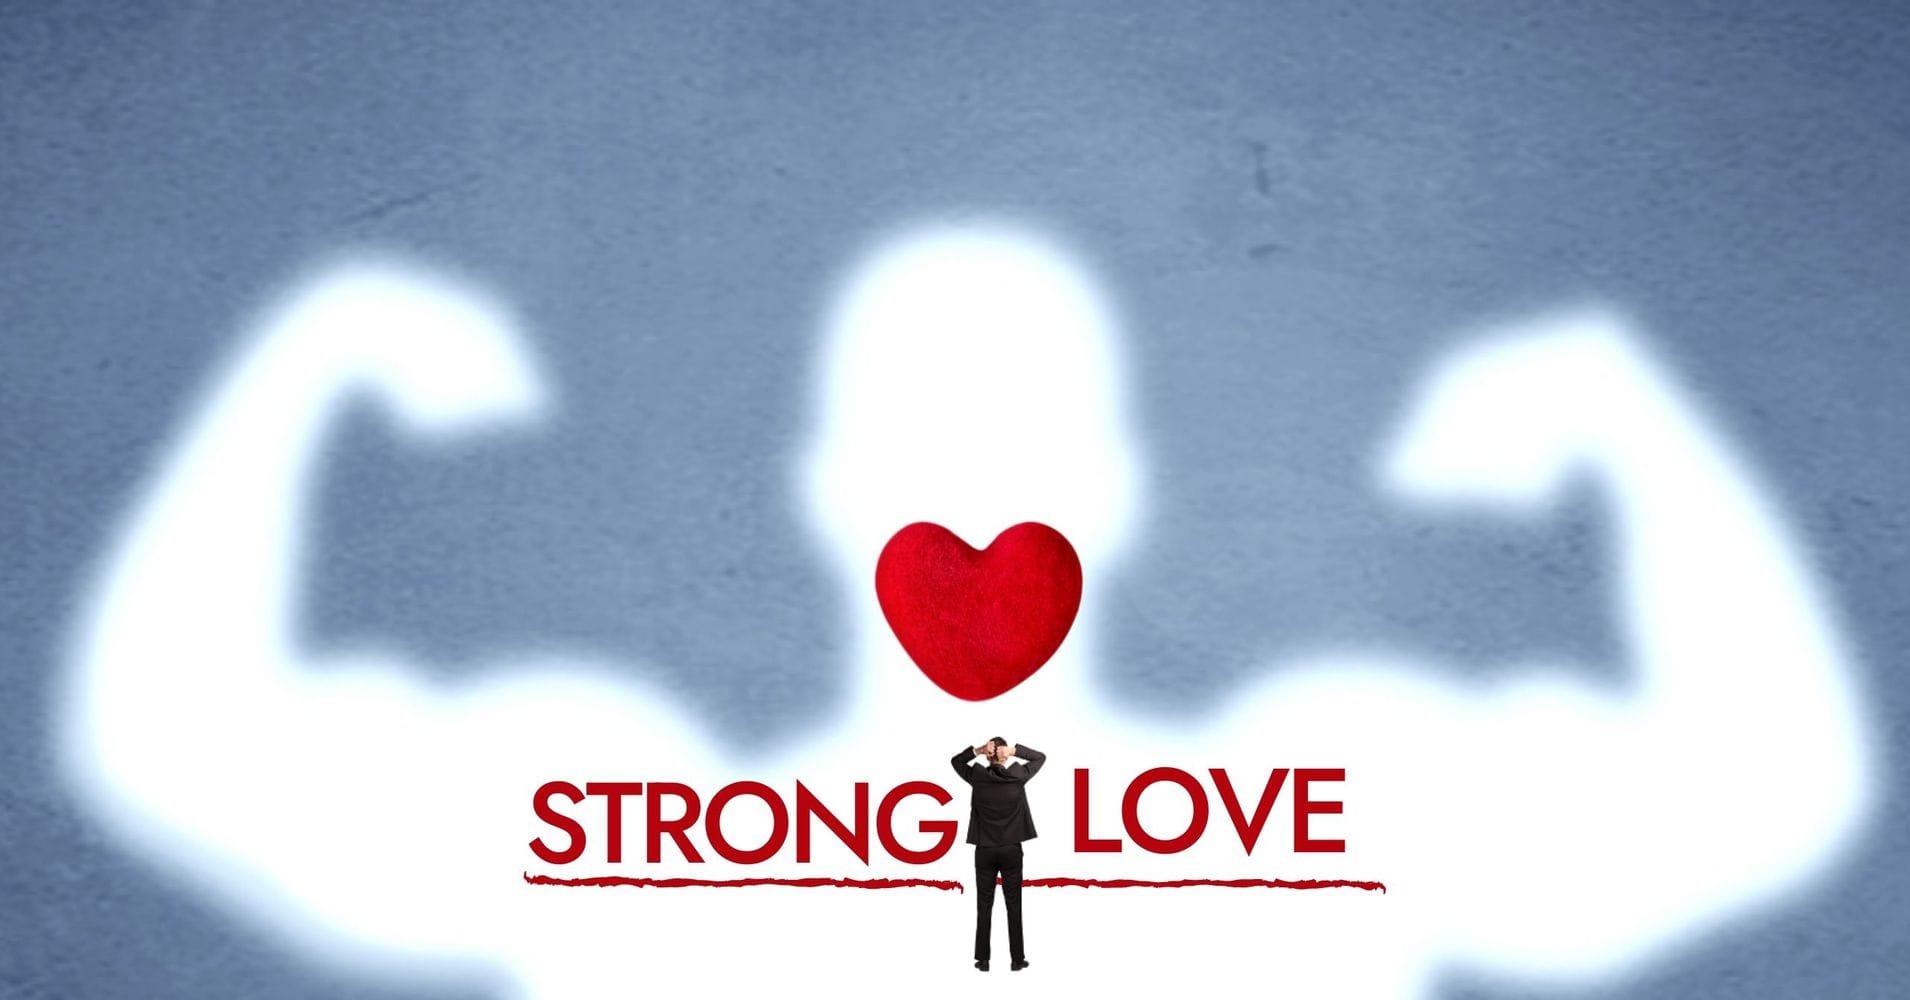 Featured image for “Strong Love”